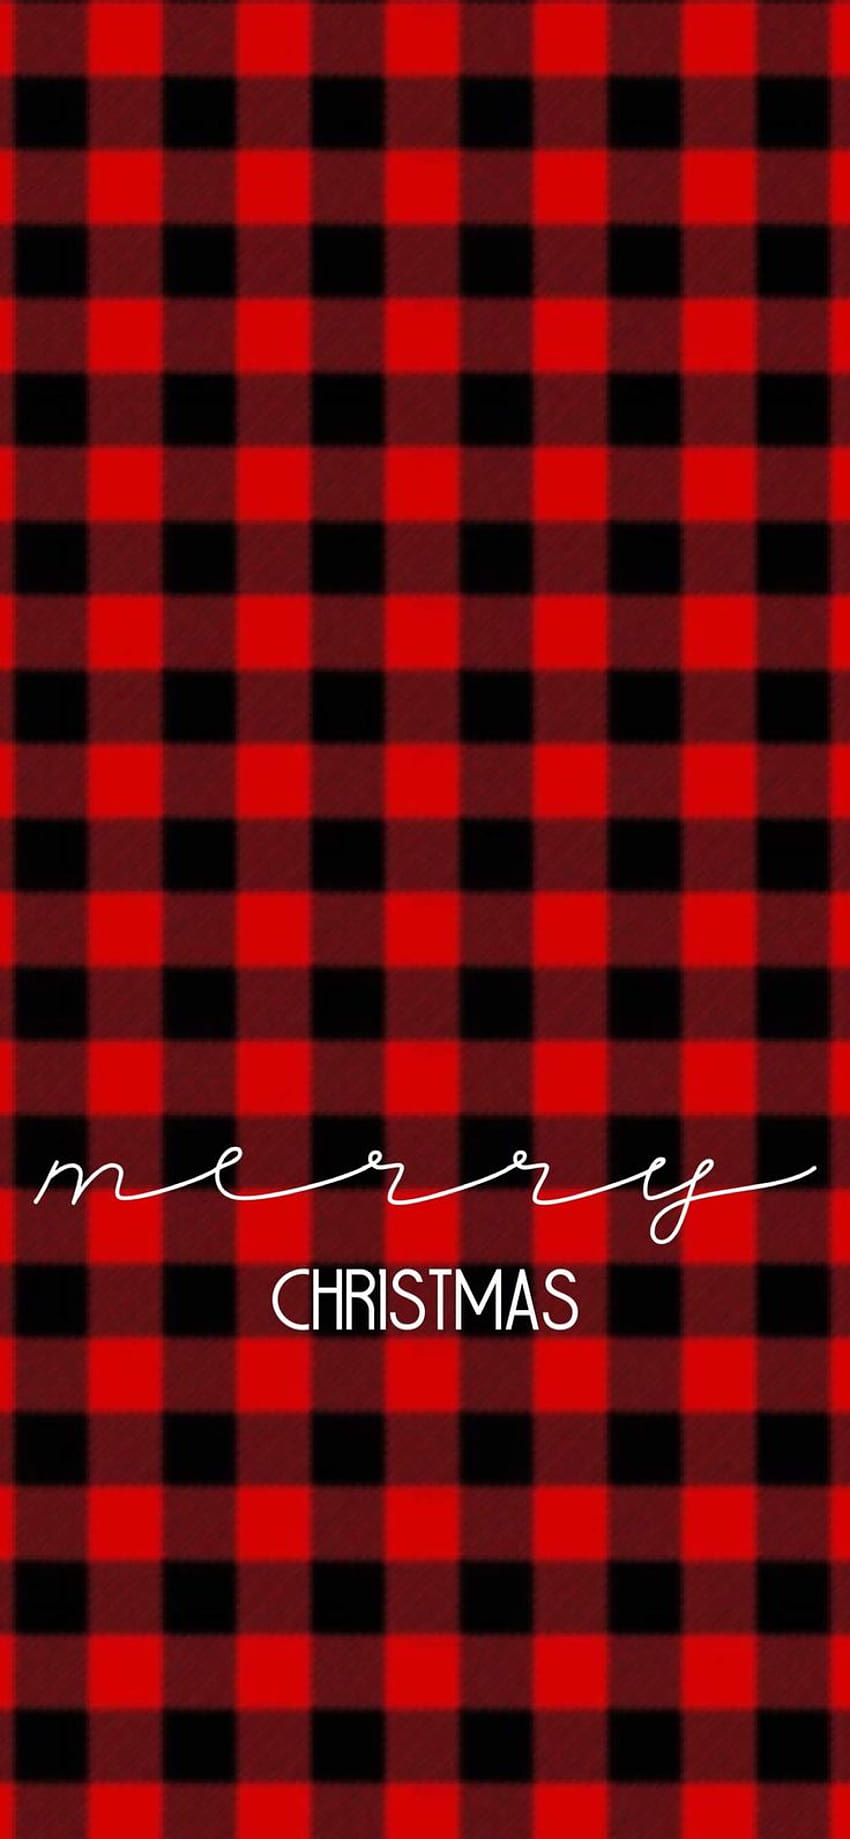 Buffalo plaid Merry Christmas backgrounds for iPhone xs Max, plaids christmas HD phone wallpaper